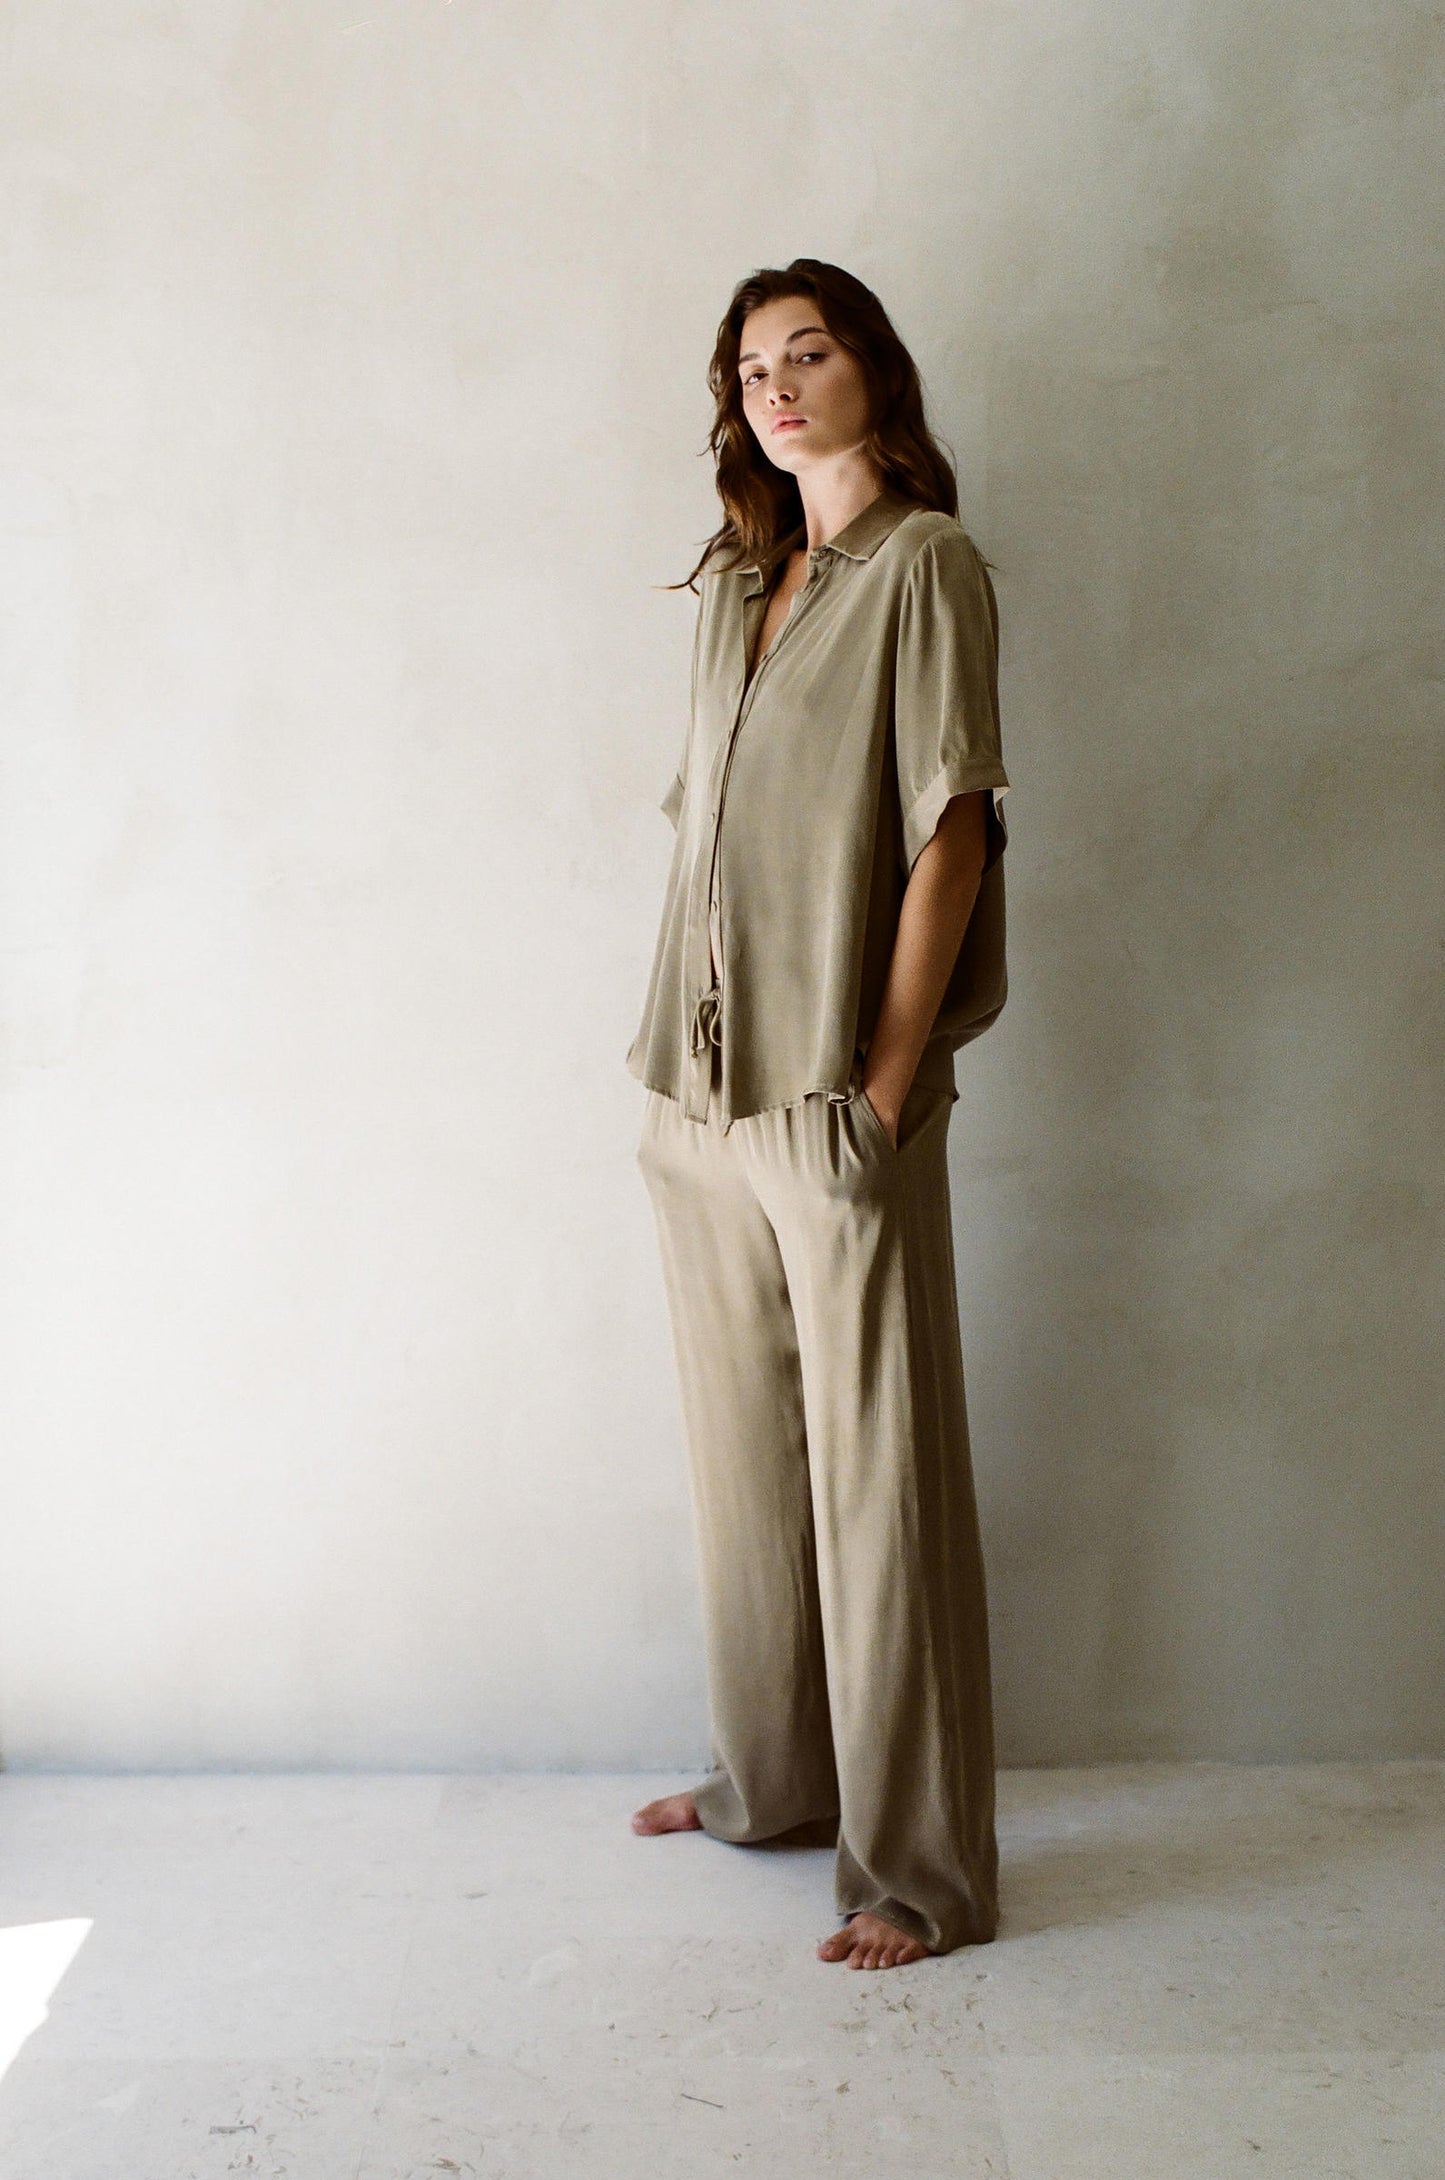 Delancey Pants by A.Ren in Toffee